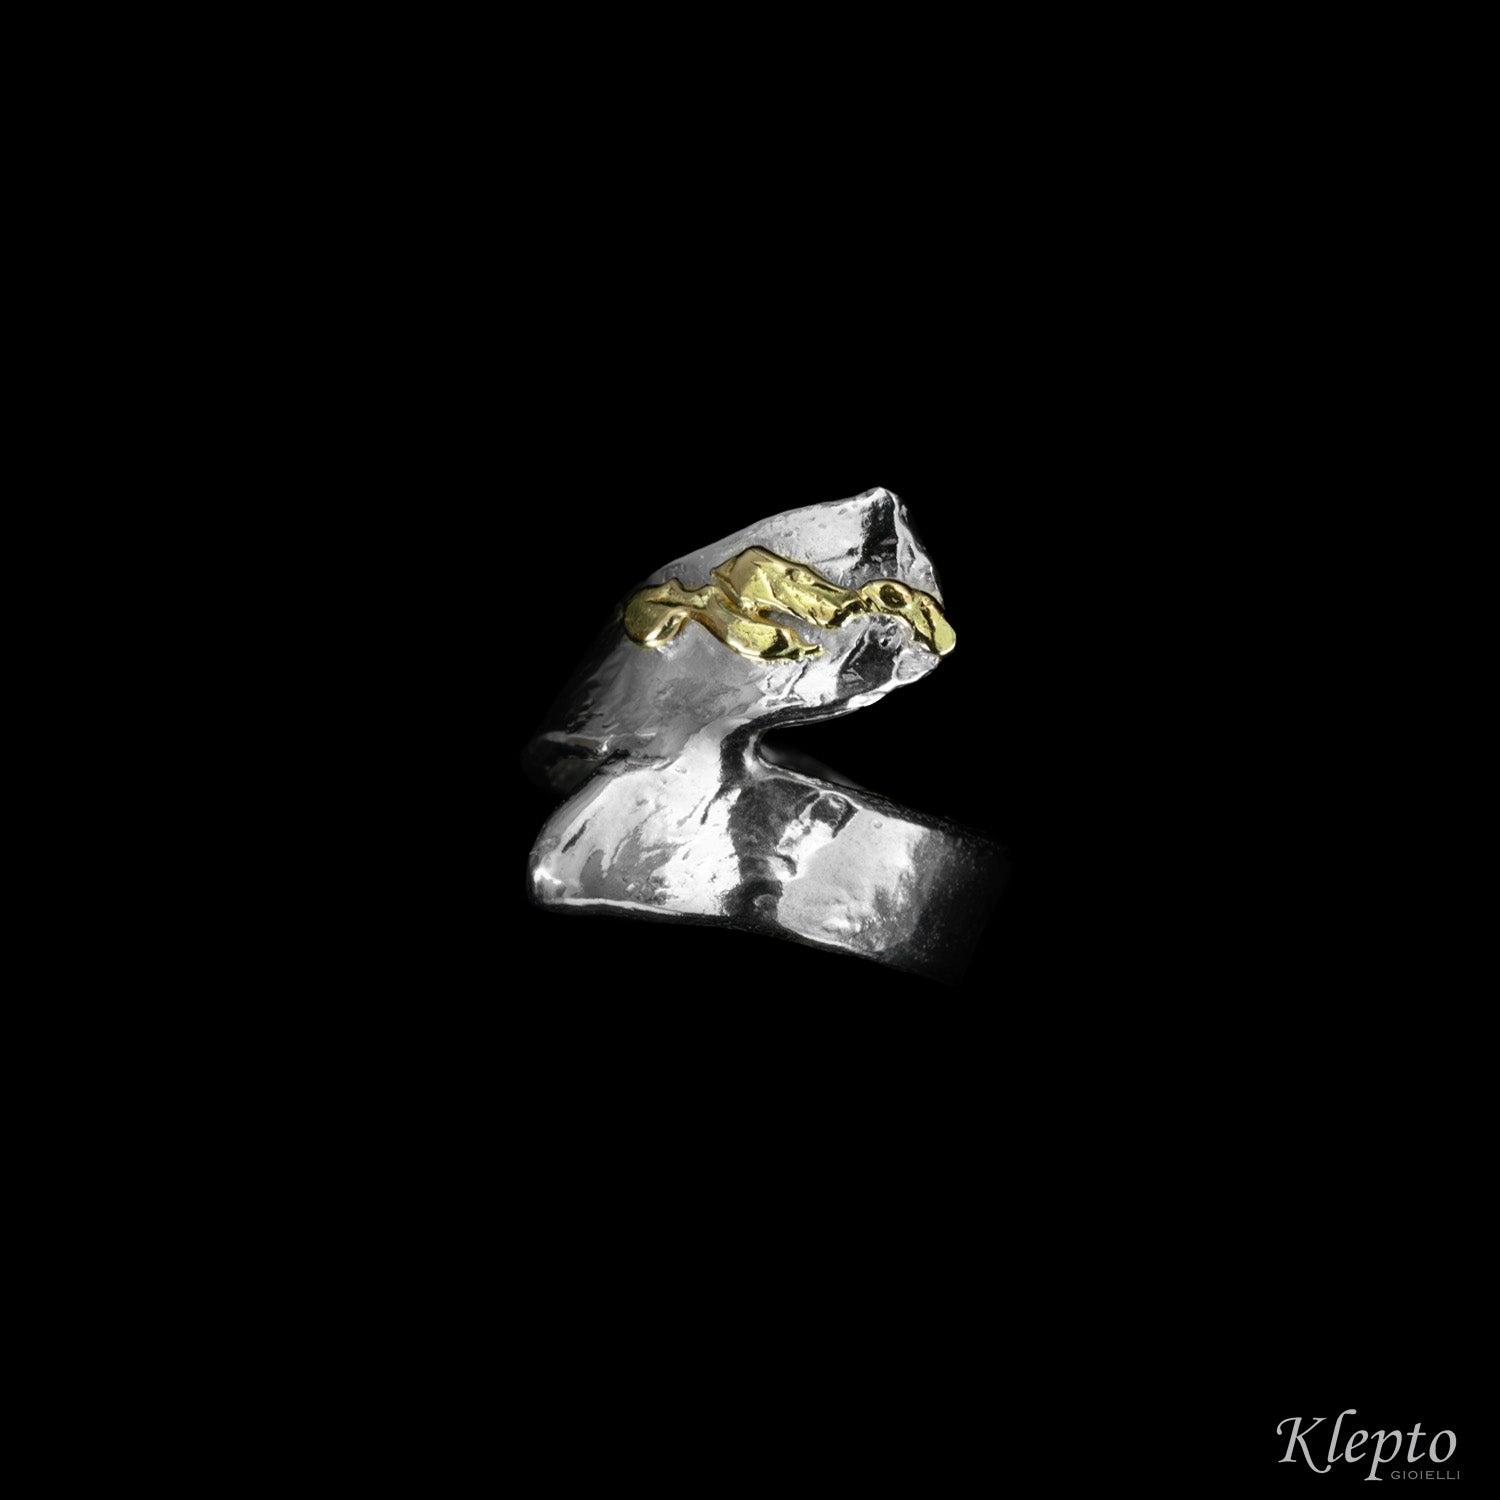 Ring in Silnova® Silver and Contrarié yellow gold